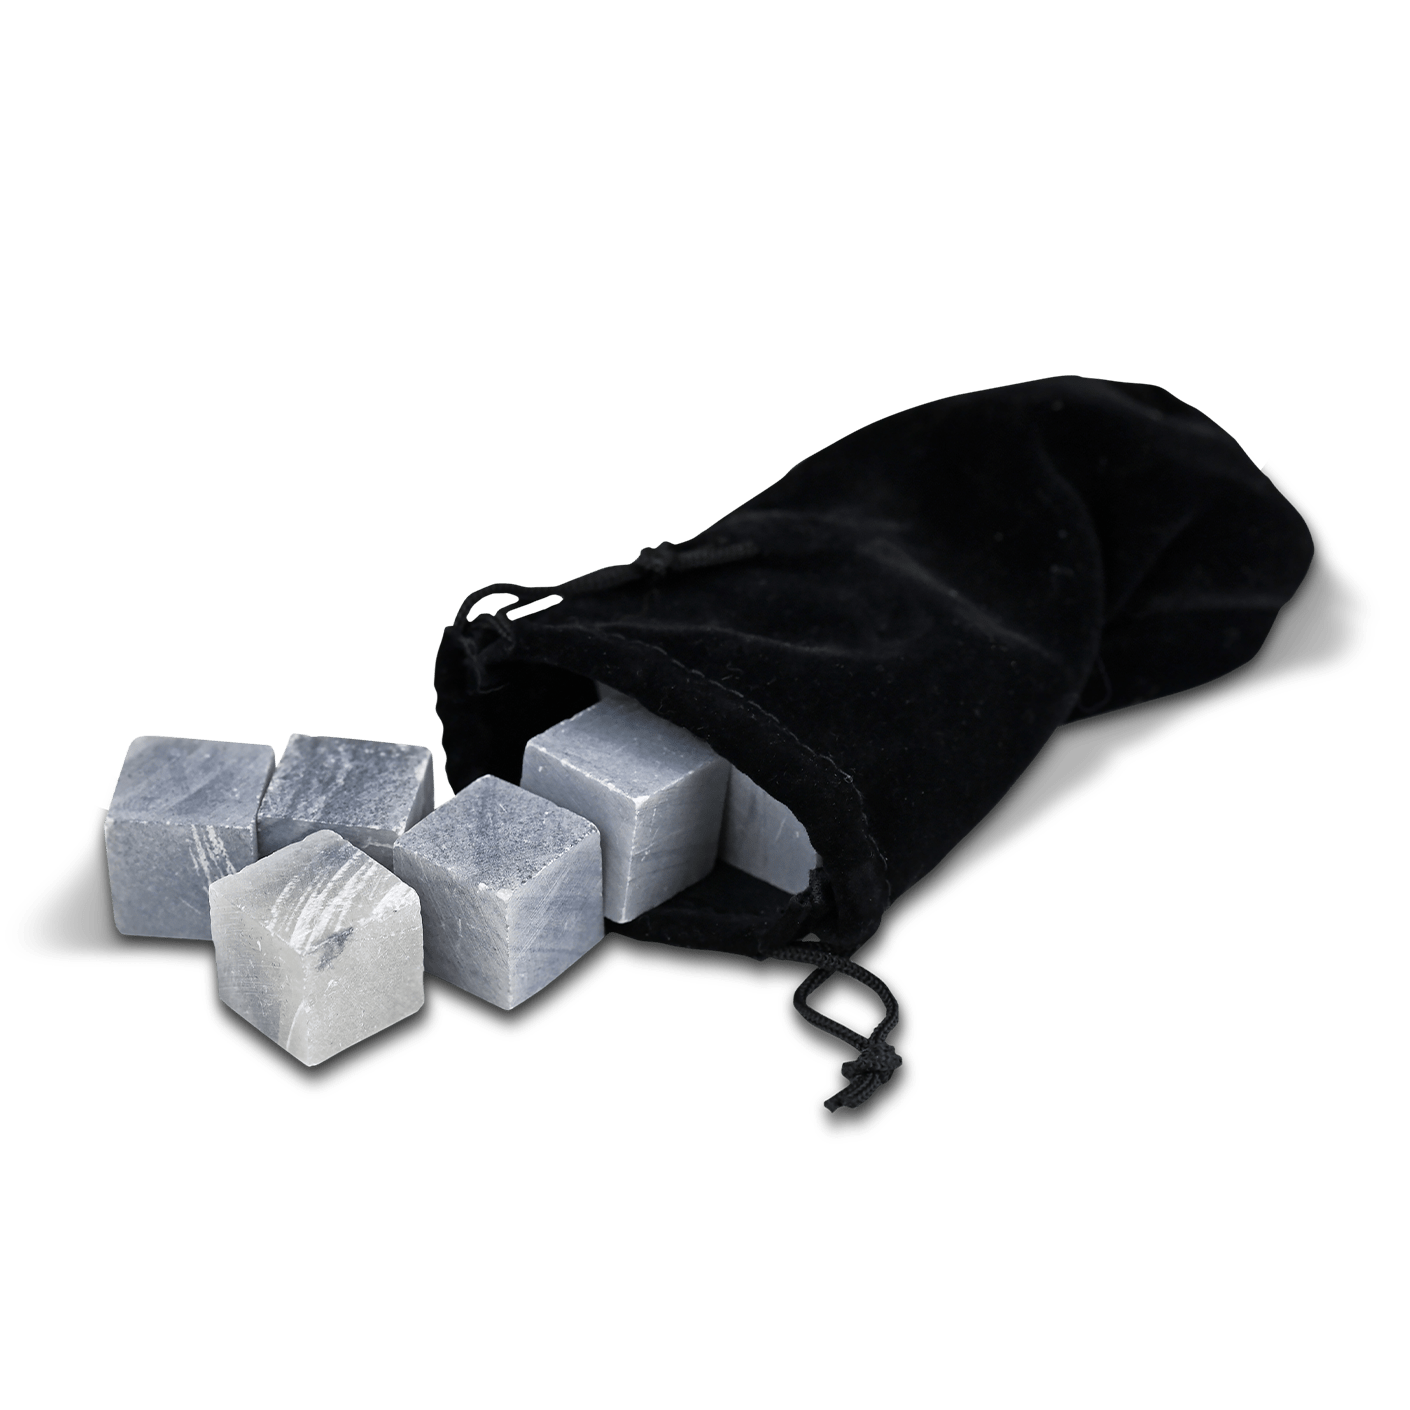 whisky stones and pouch